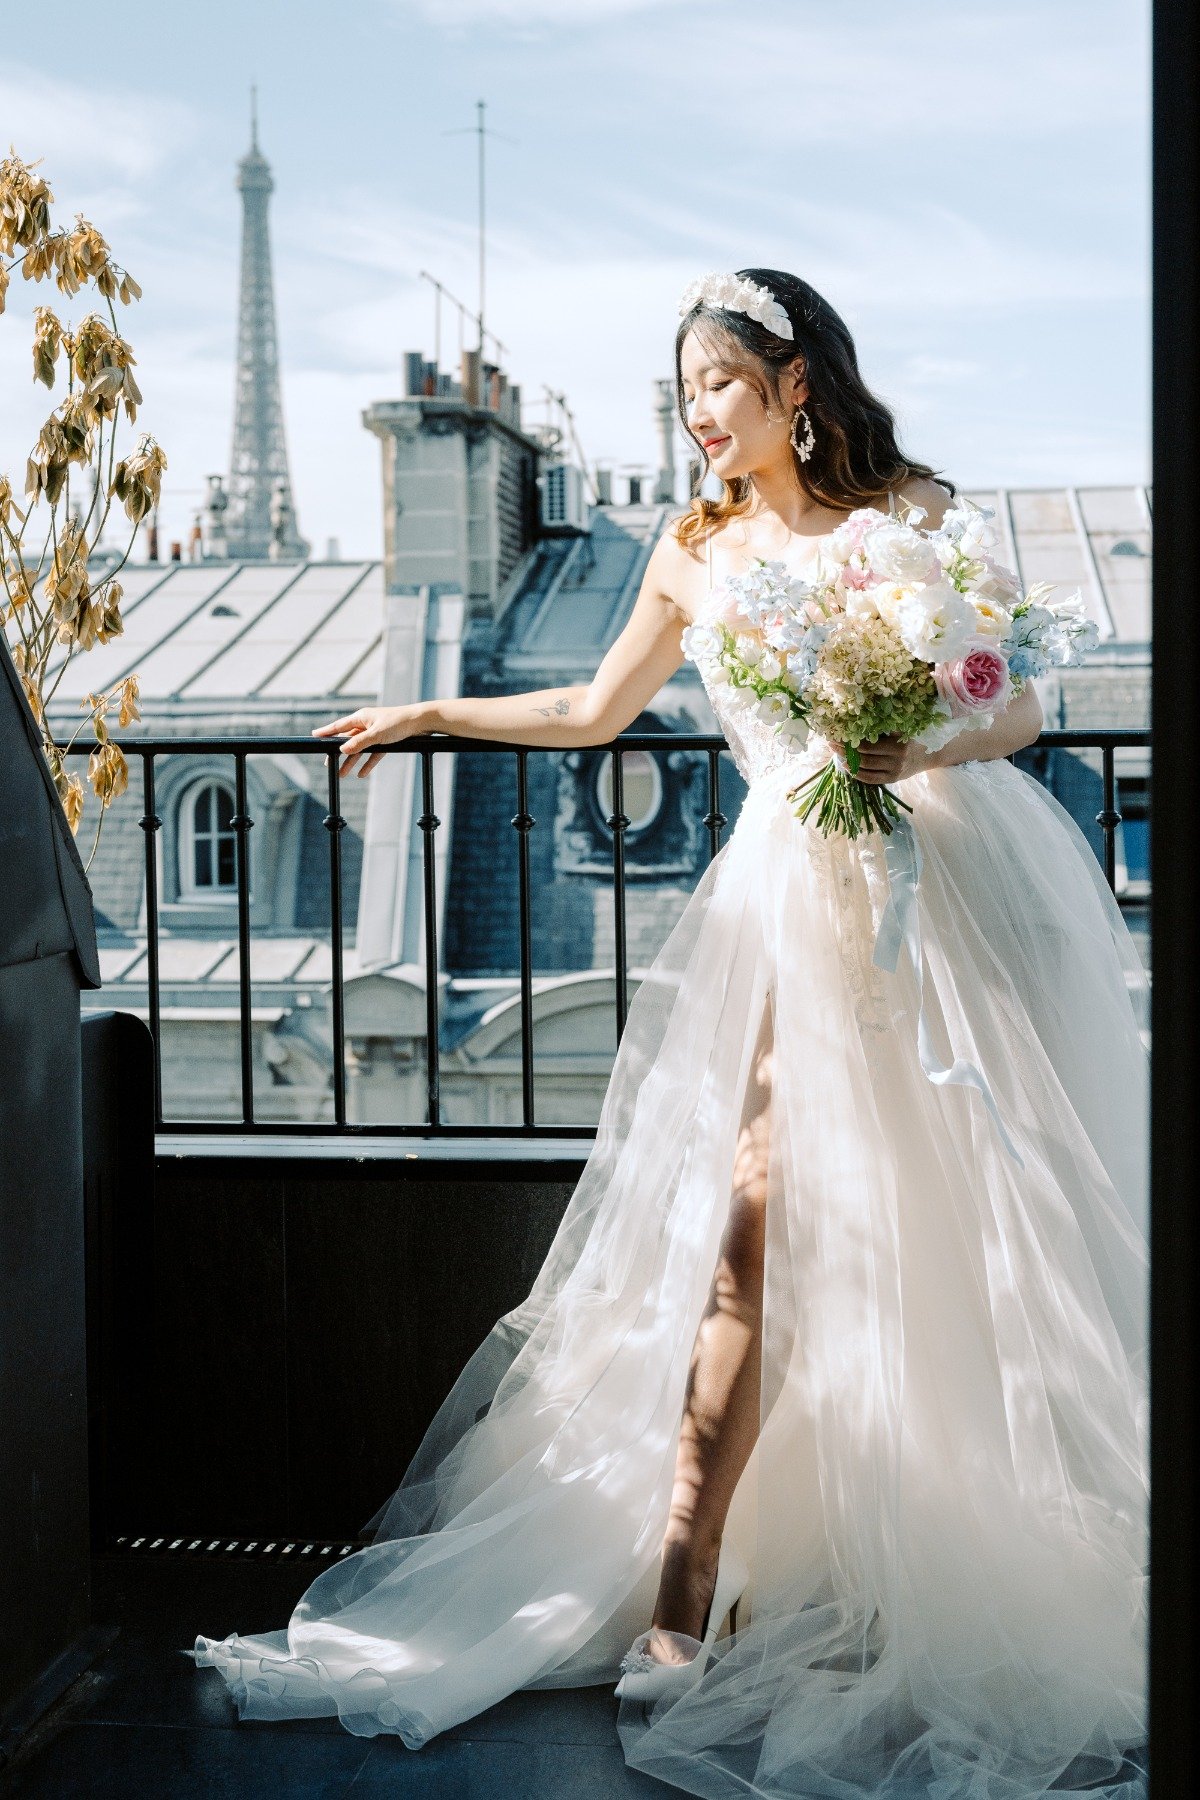 Parisian elopement inspiration in shades of blue and pink